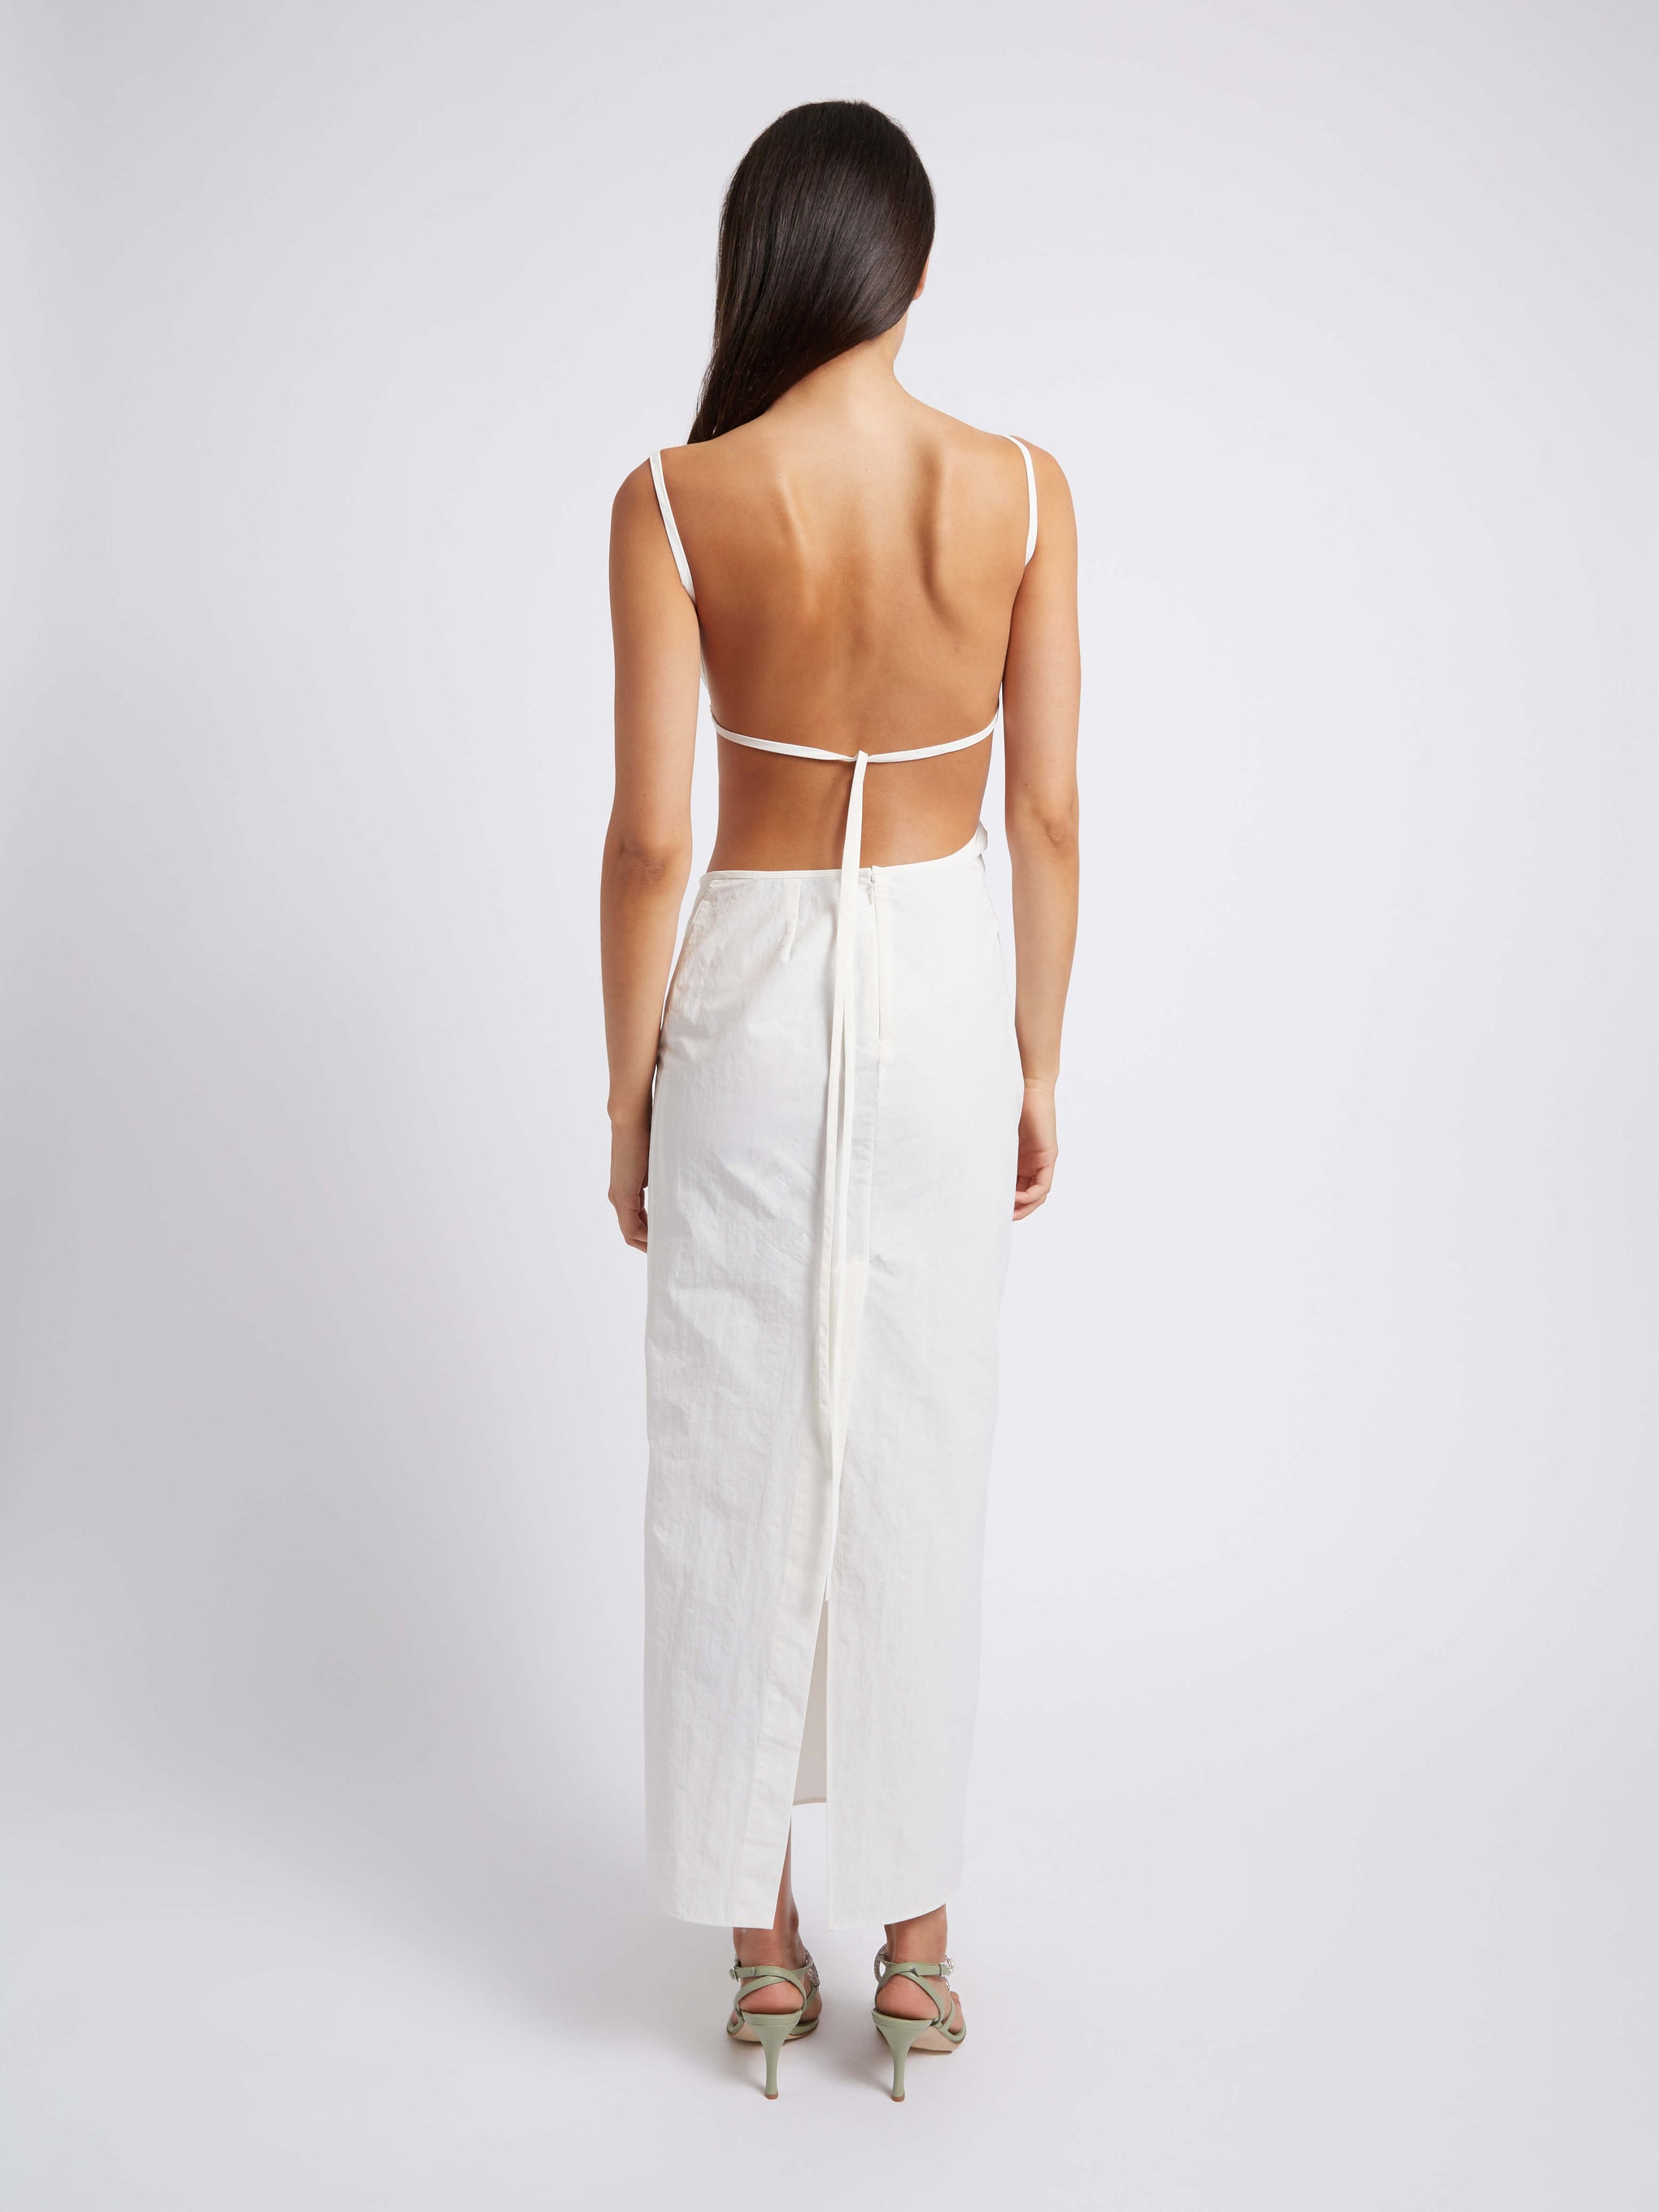 Christopher Esber Interlocked Ruched Dress in White from The New Trend